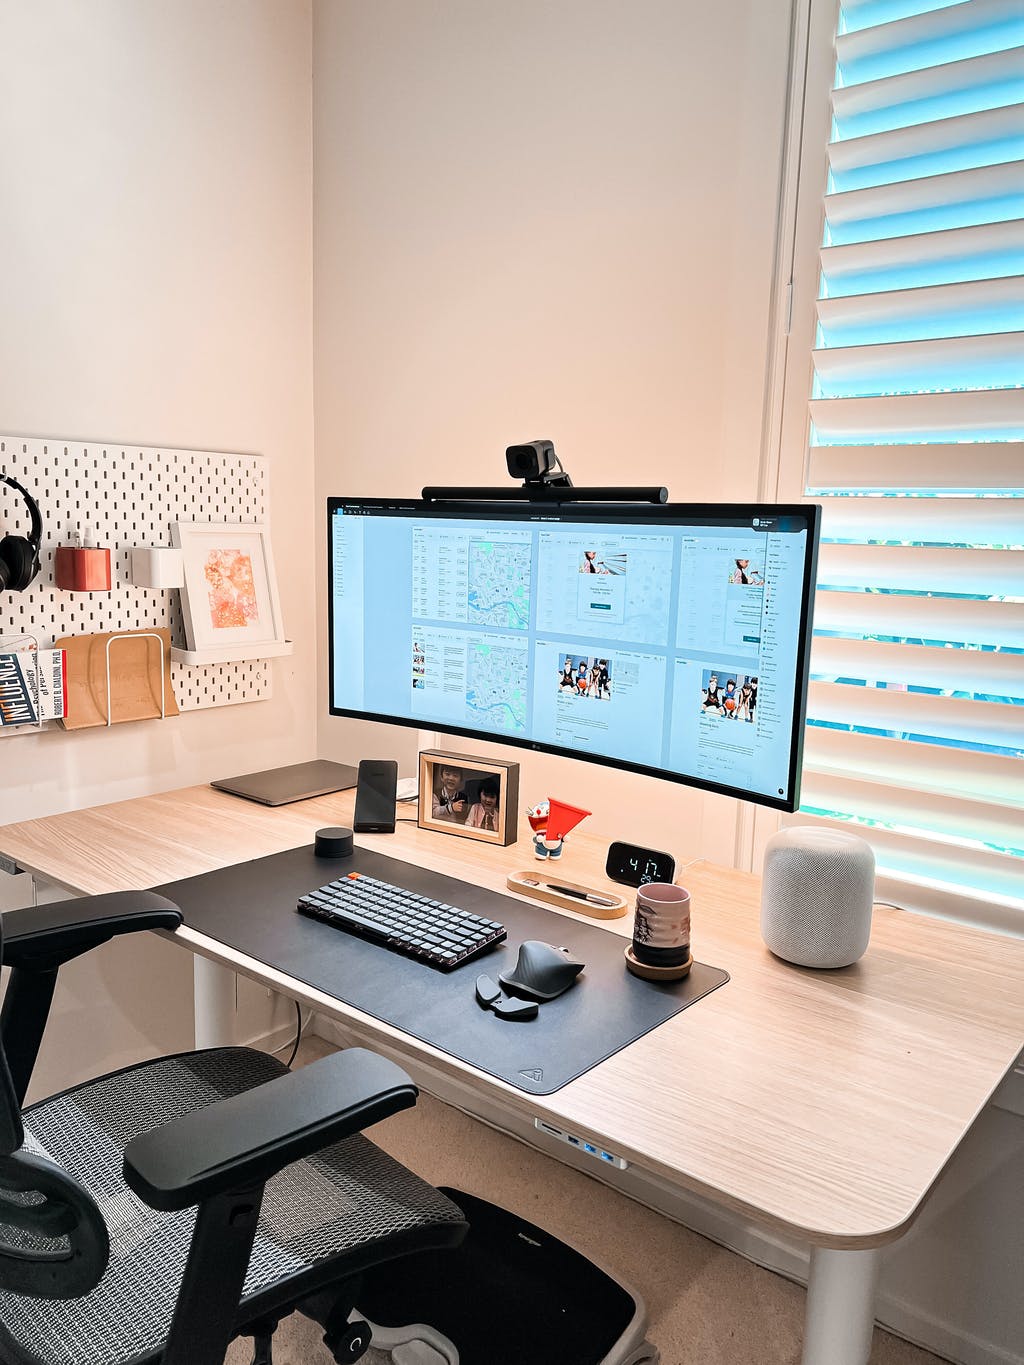 Which Desk Mat Is Right For Your Desk Setup? (Wool vs Leather vs